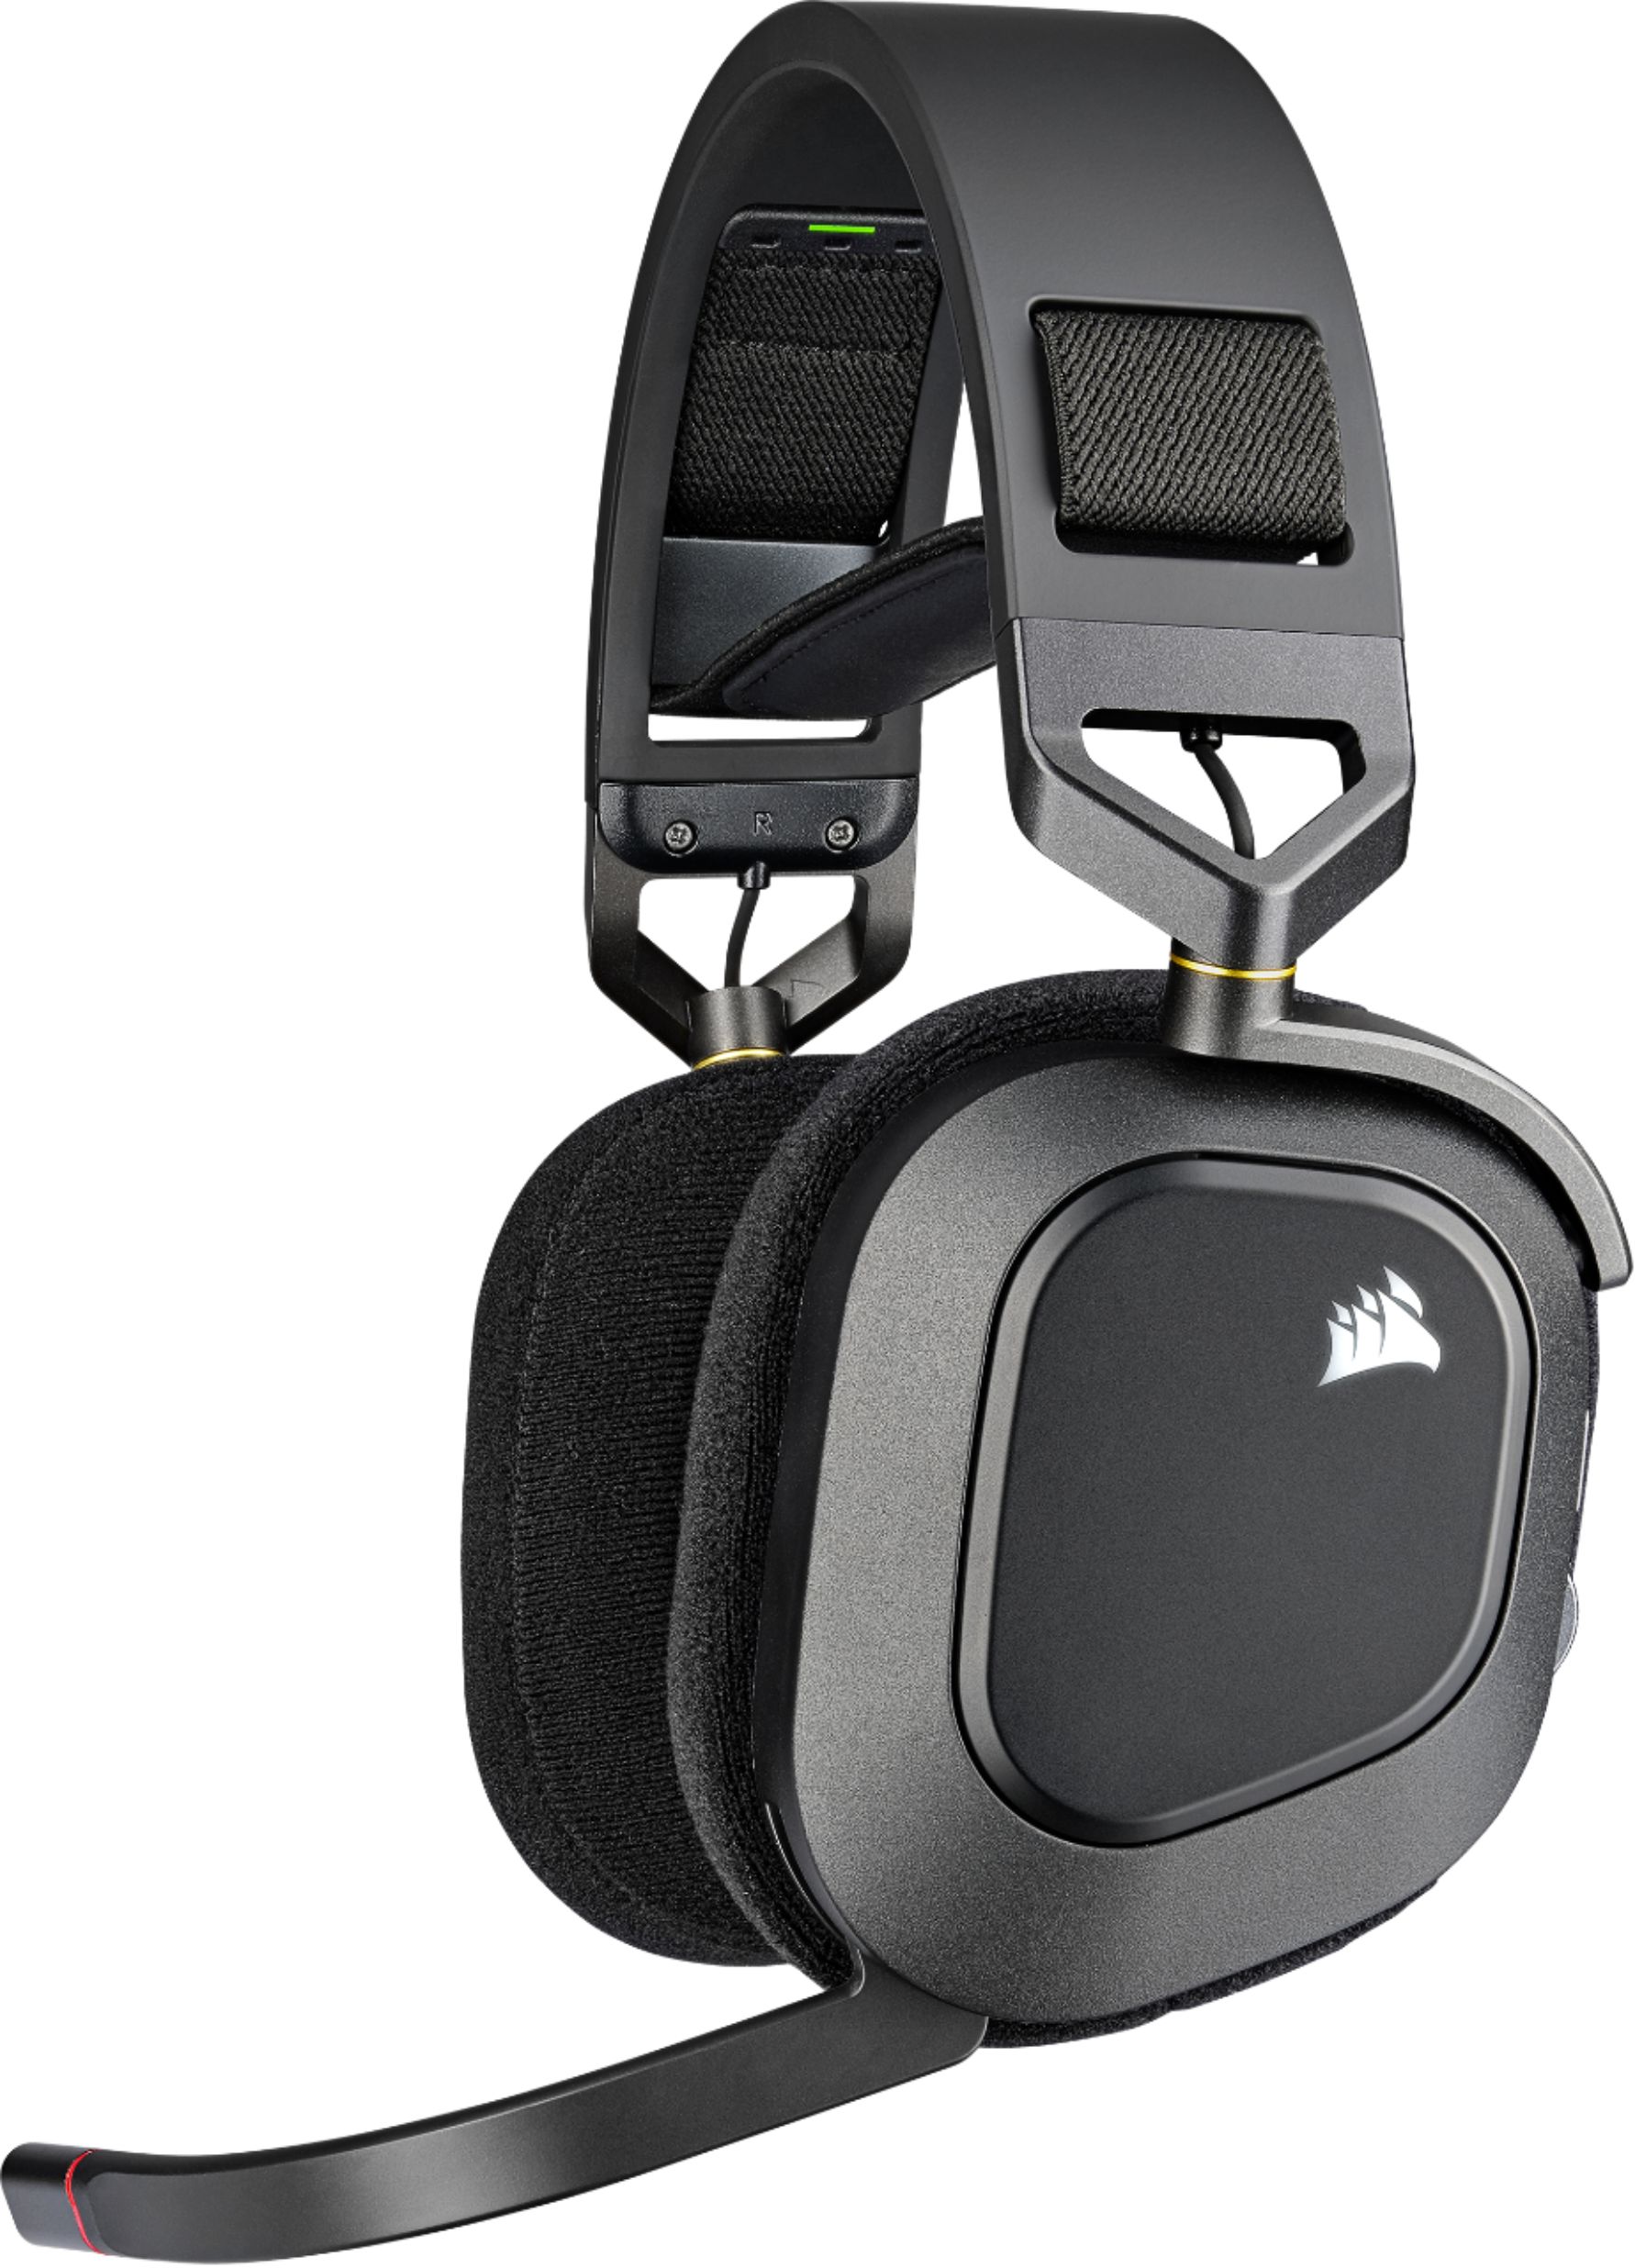 CORSAIR RGB WIRELESS Dolby Atmos Gaming for PC, Mac, PS5|PS4 with Broadcast-Grade Omni-Directional Microphone Carbon CA-9011235-NA - Best Buy